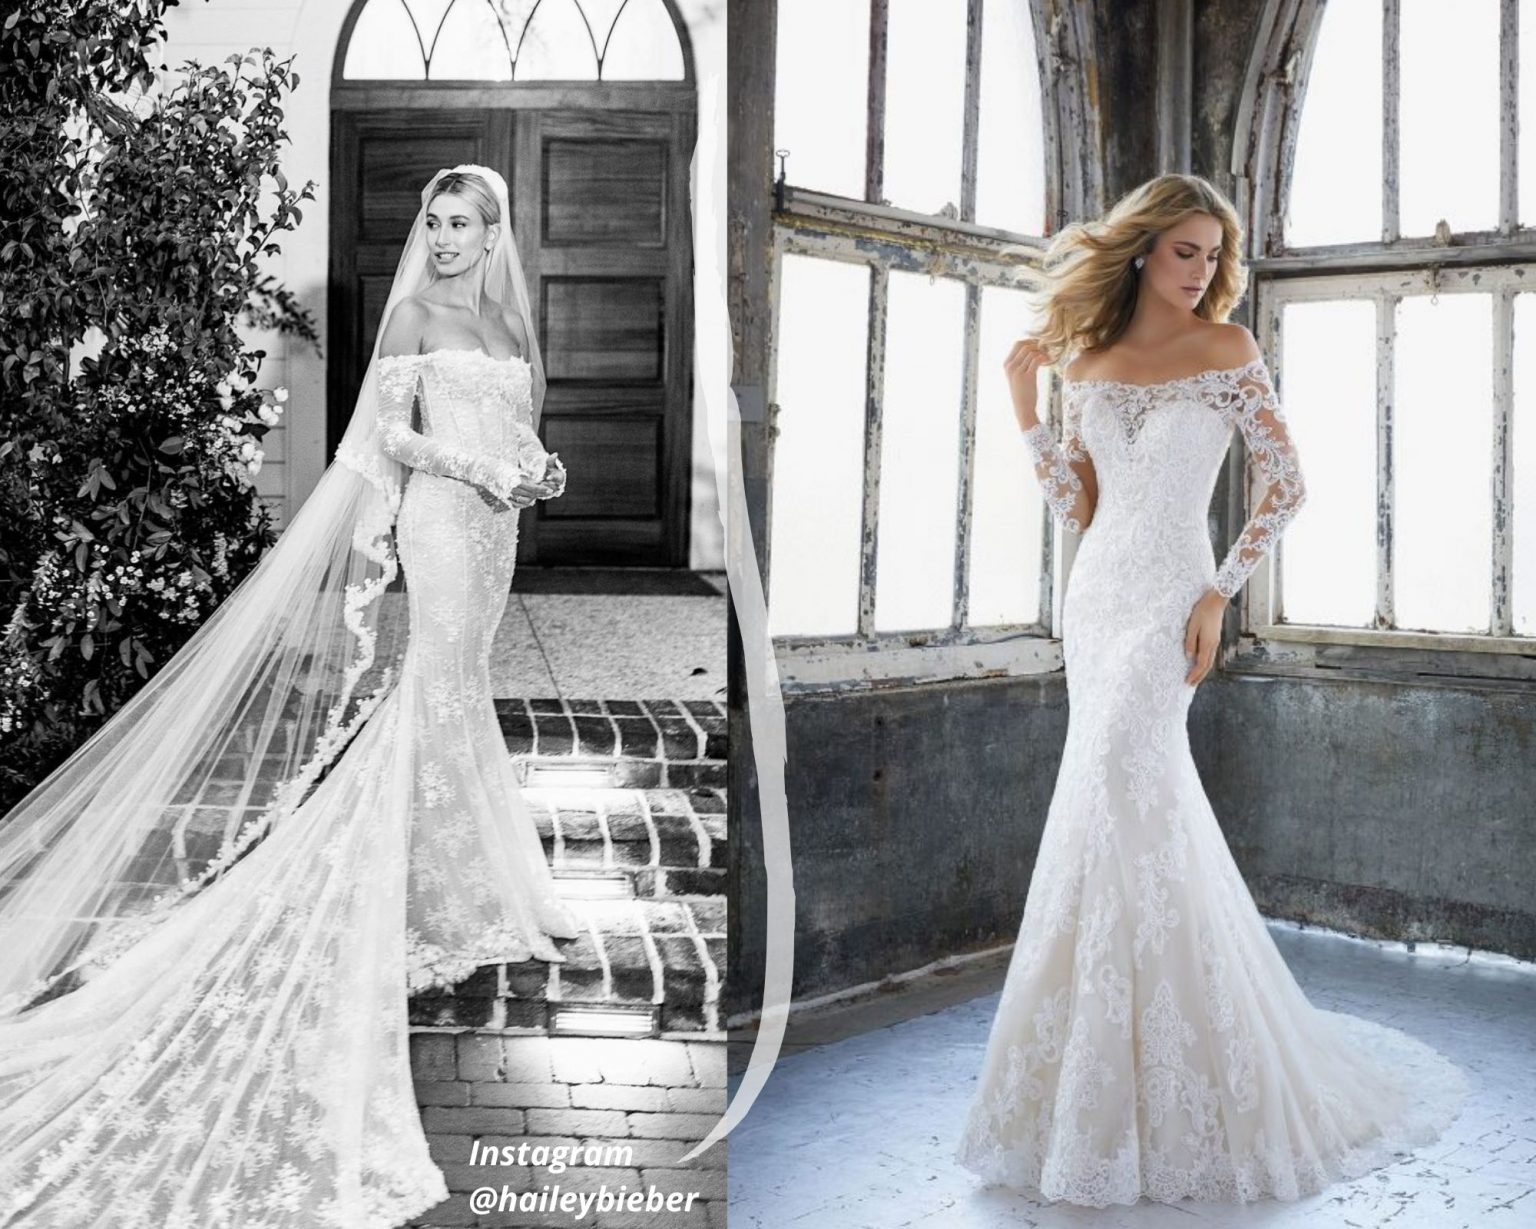 Steal Their Style: Celebrity Inspired Wedding Dresses - Wedding Journal